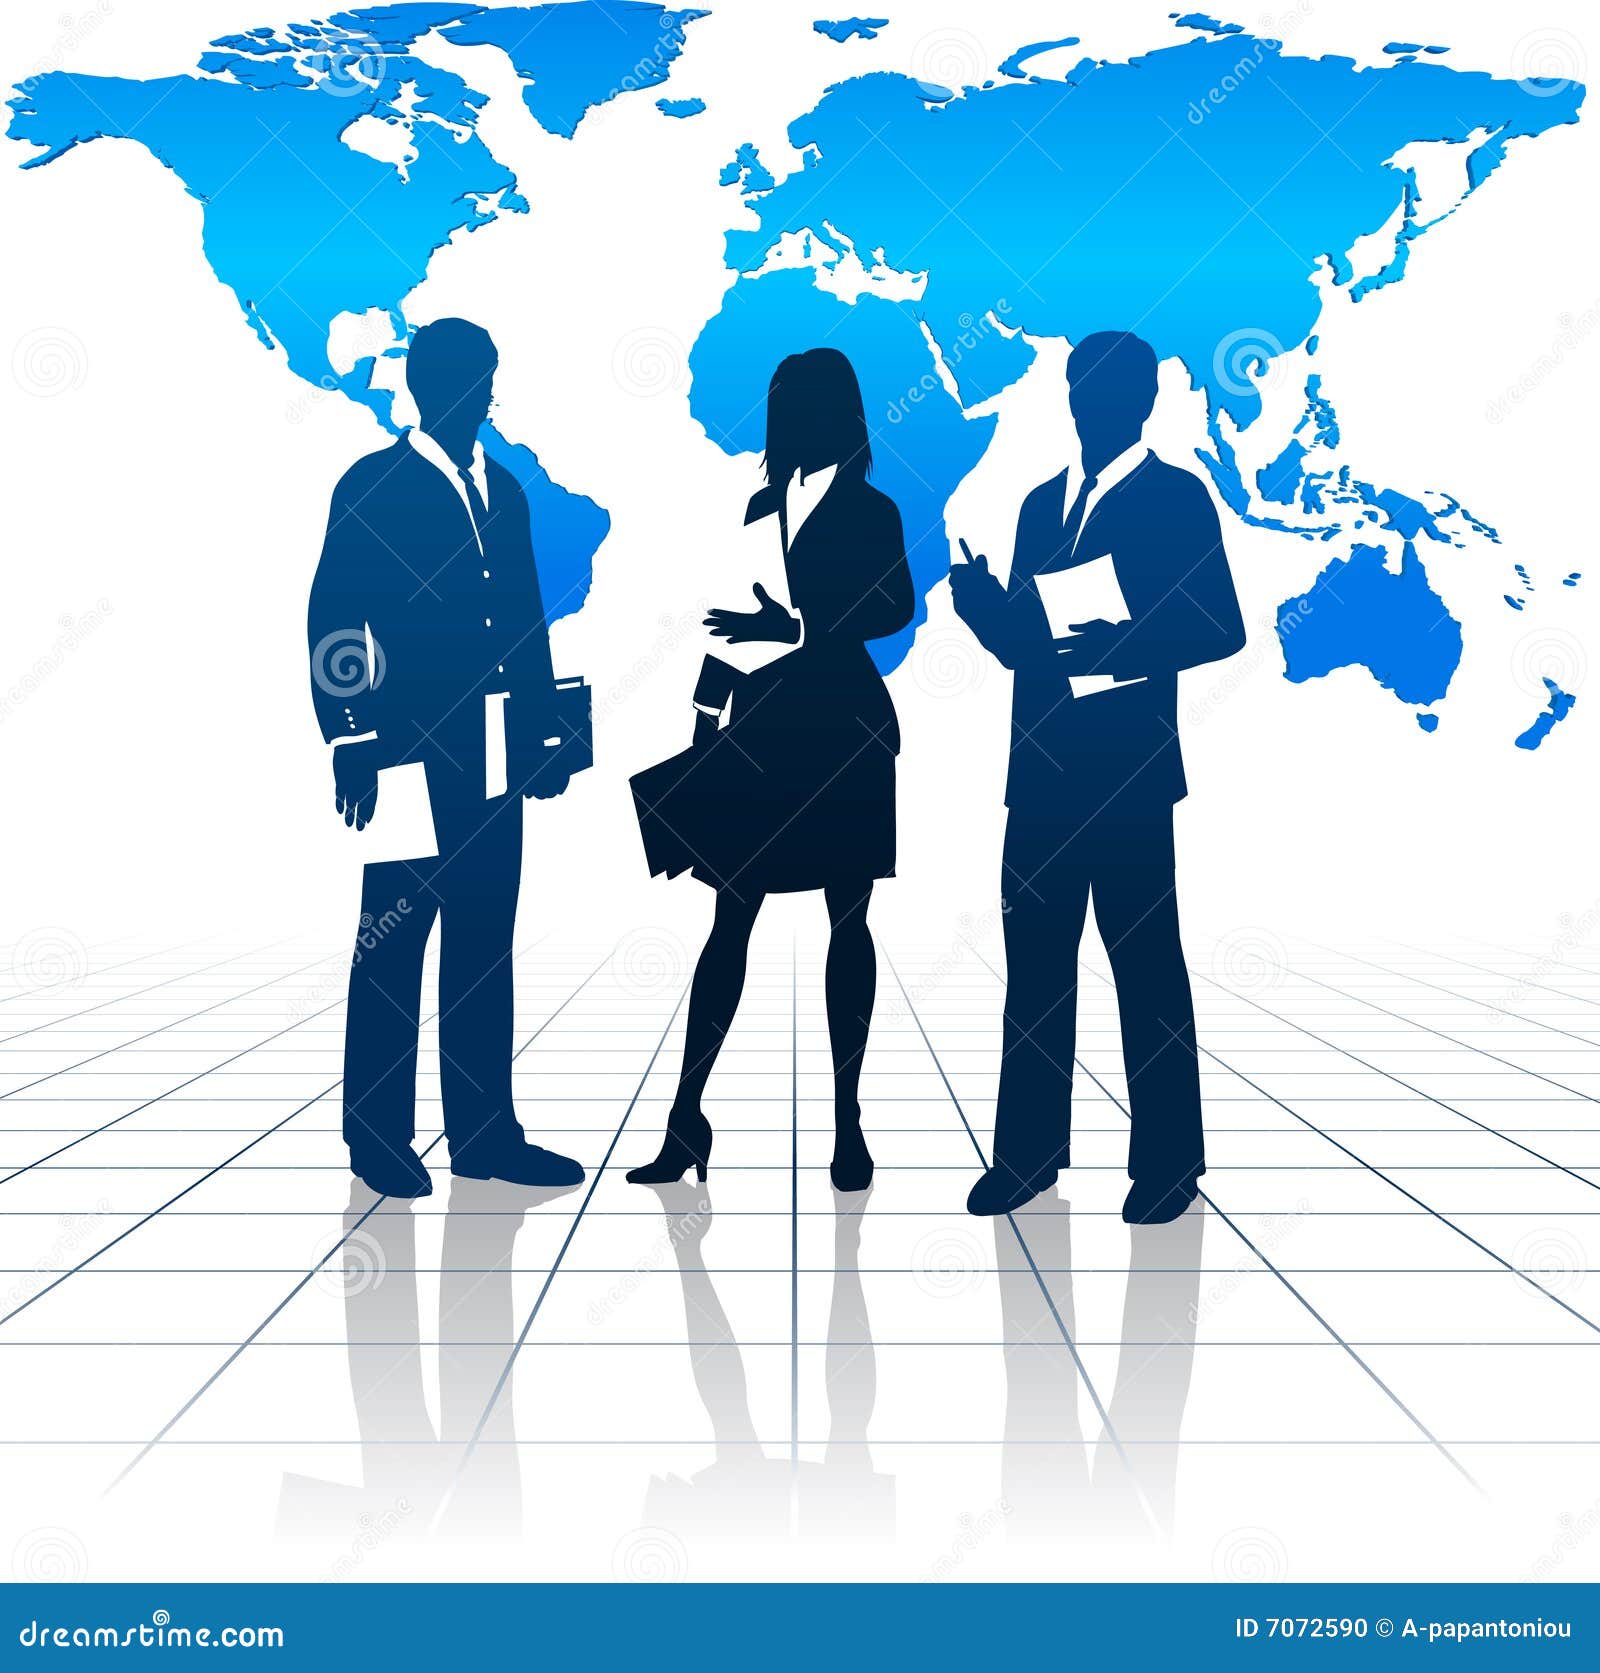 global business clipart - photo #18